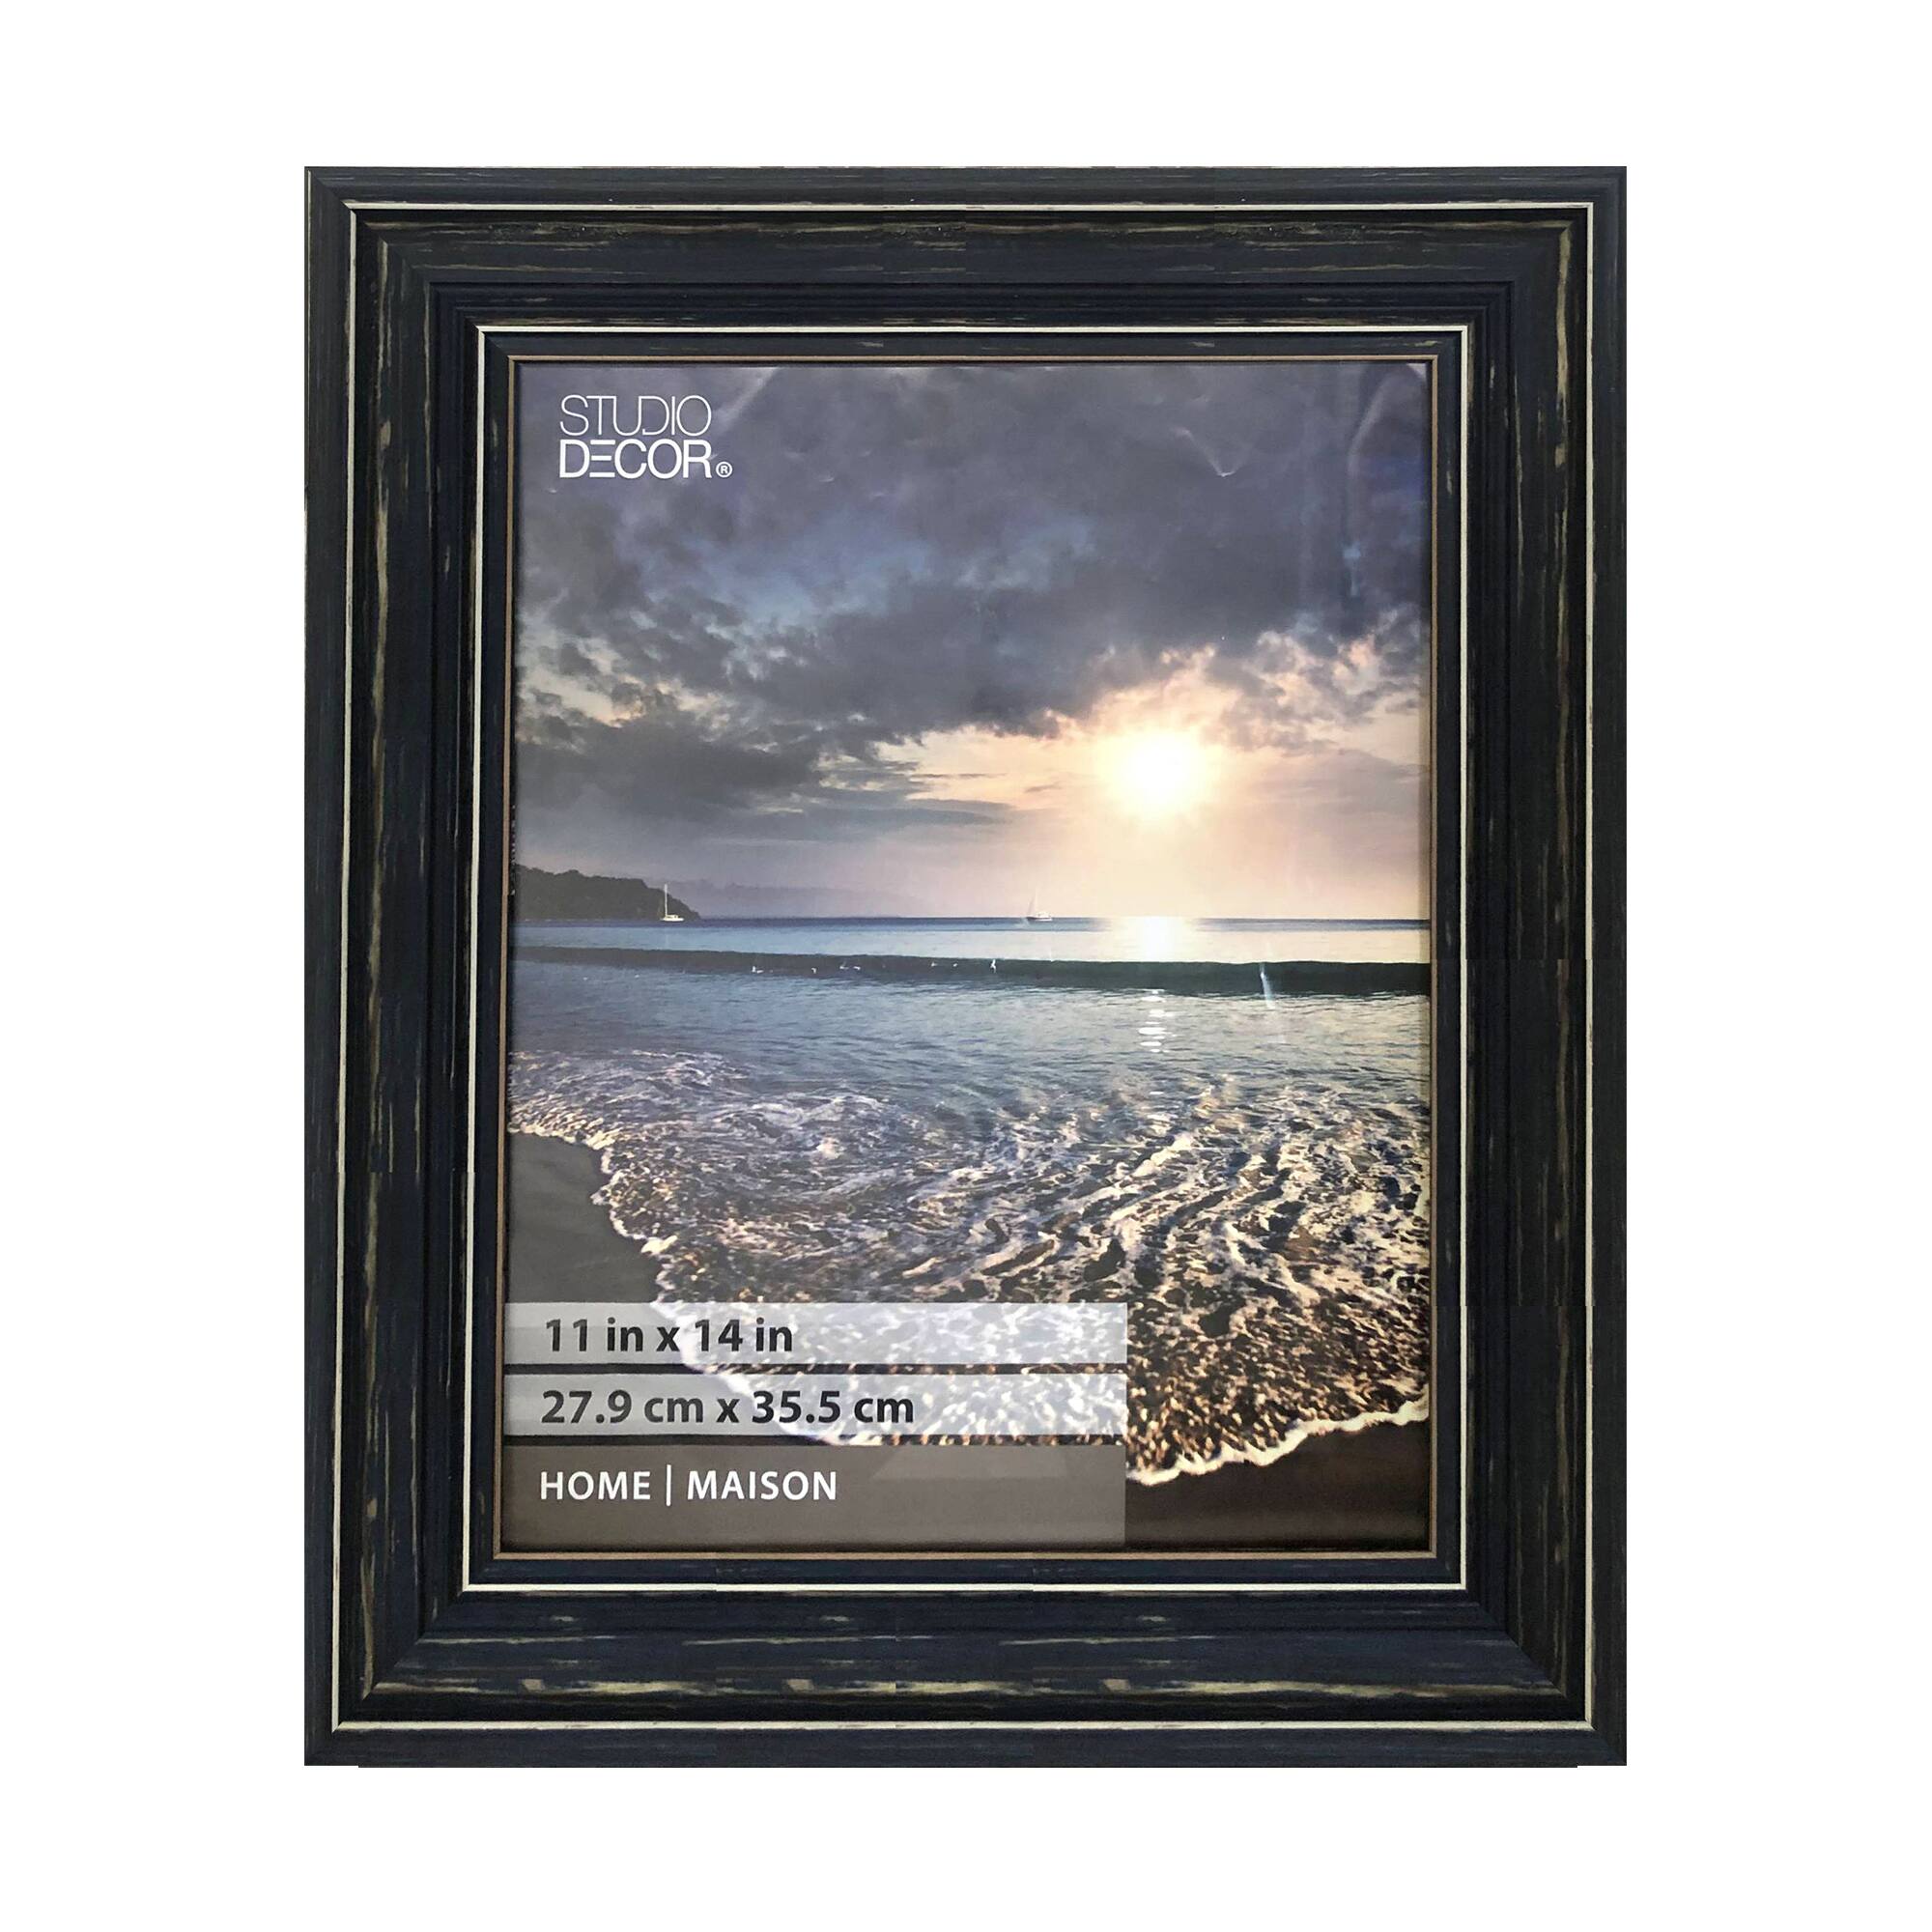 Shop for the Distressed Blue Frame, 11